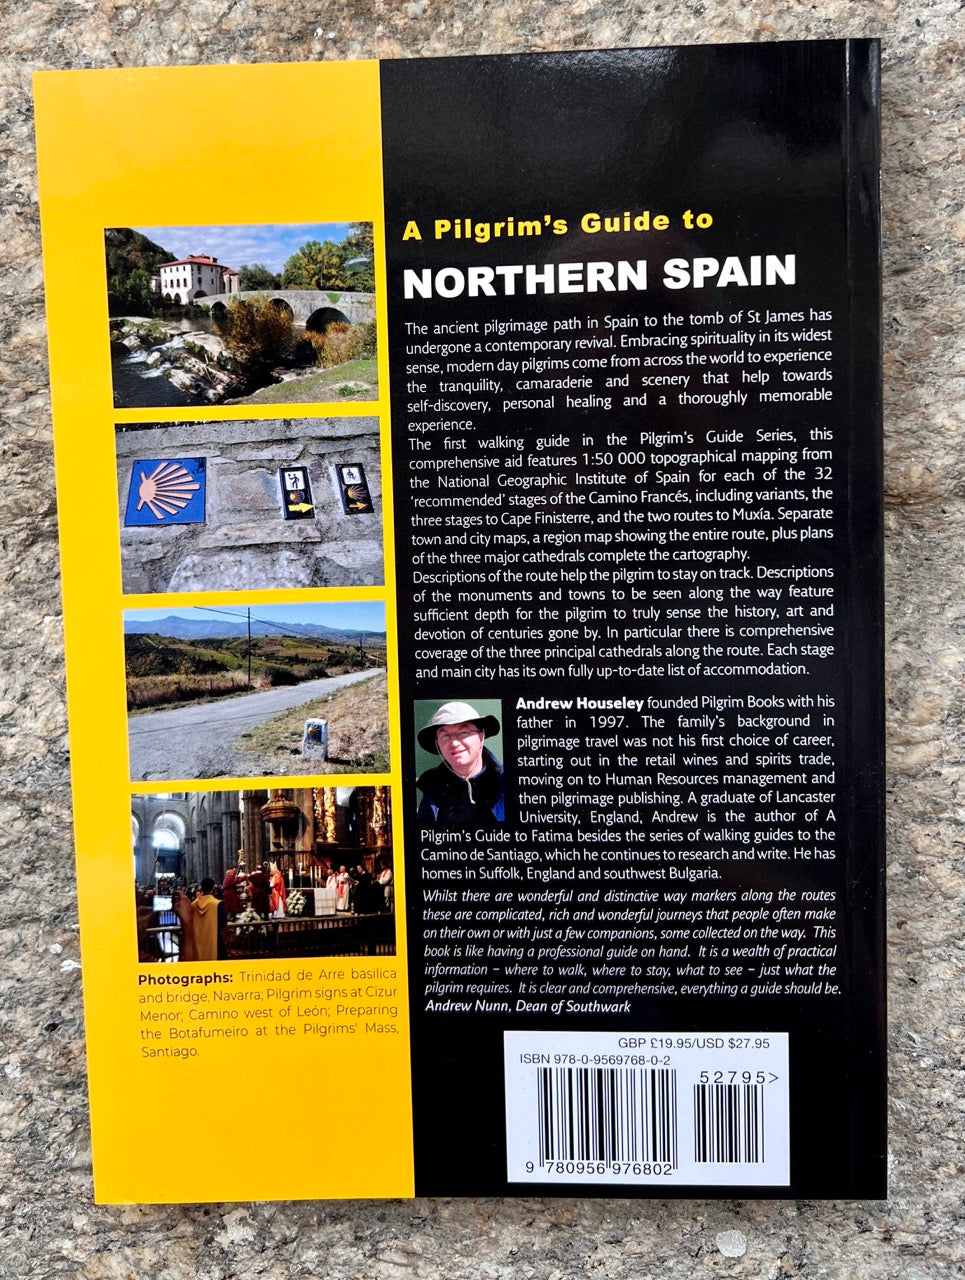 2023 edition: "A Pilgrims Guide to Northern Spain, Camino Francés & Camino Finisterre" by Andrew Houseley